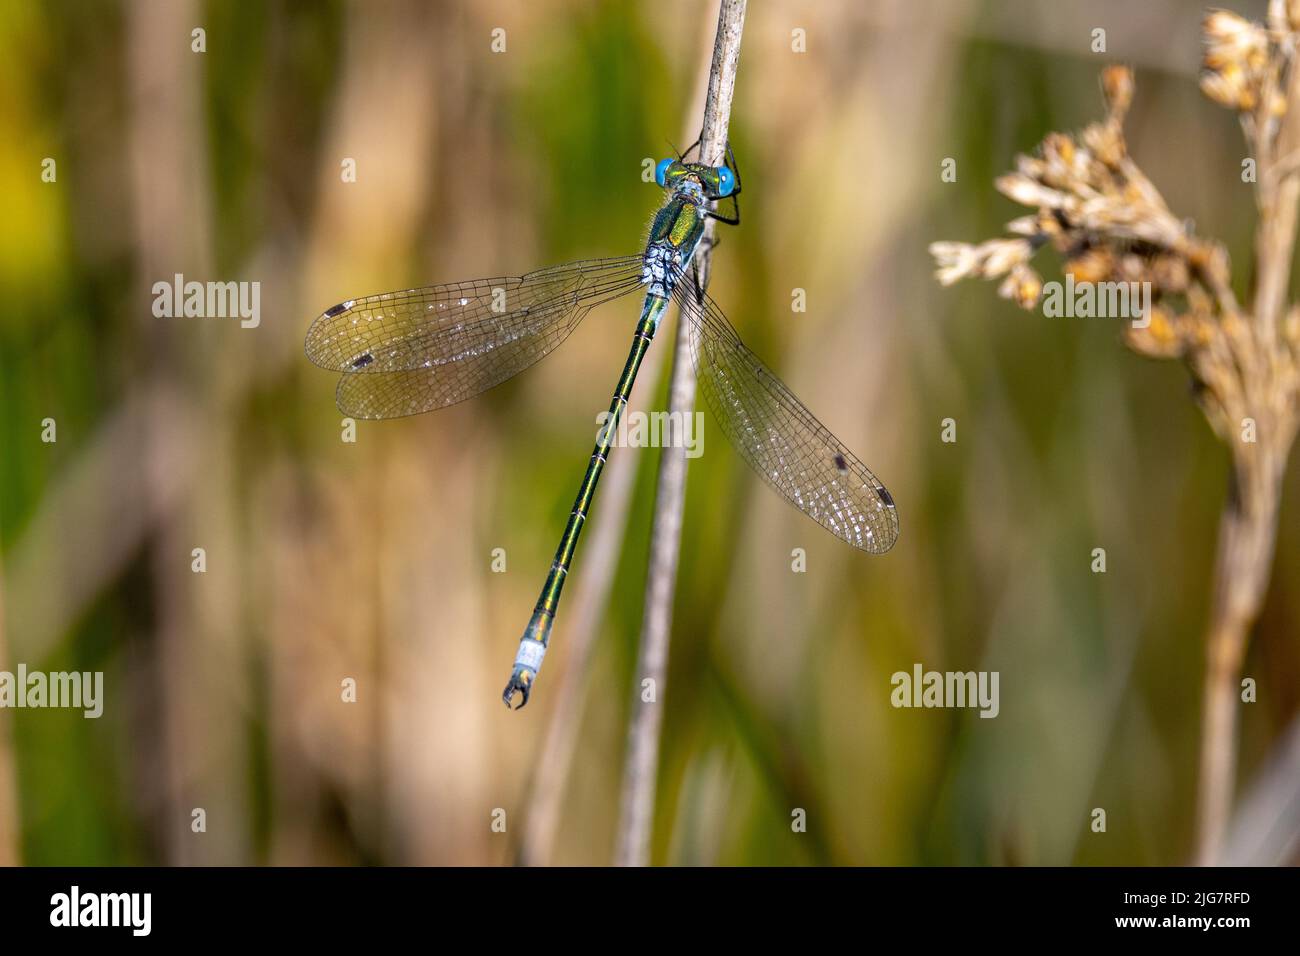 Lestes dryas Kirby, 1890 ans (homme). Rare Emerald Damselfly, robuste Spreadwing, Emerald Spreadwing, Turlough Spreadwing. Felixstowe, Suffolk. Banque D'Images